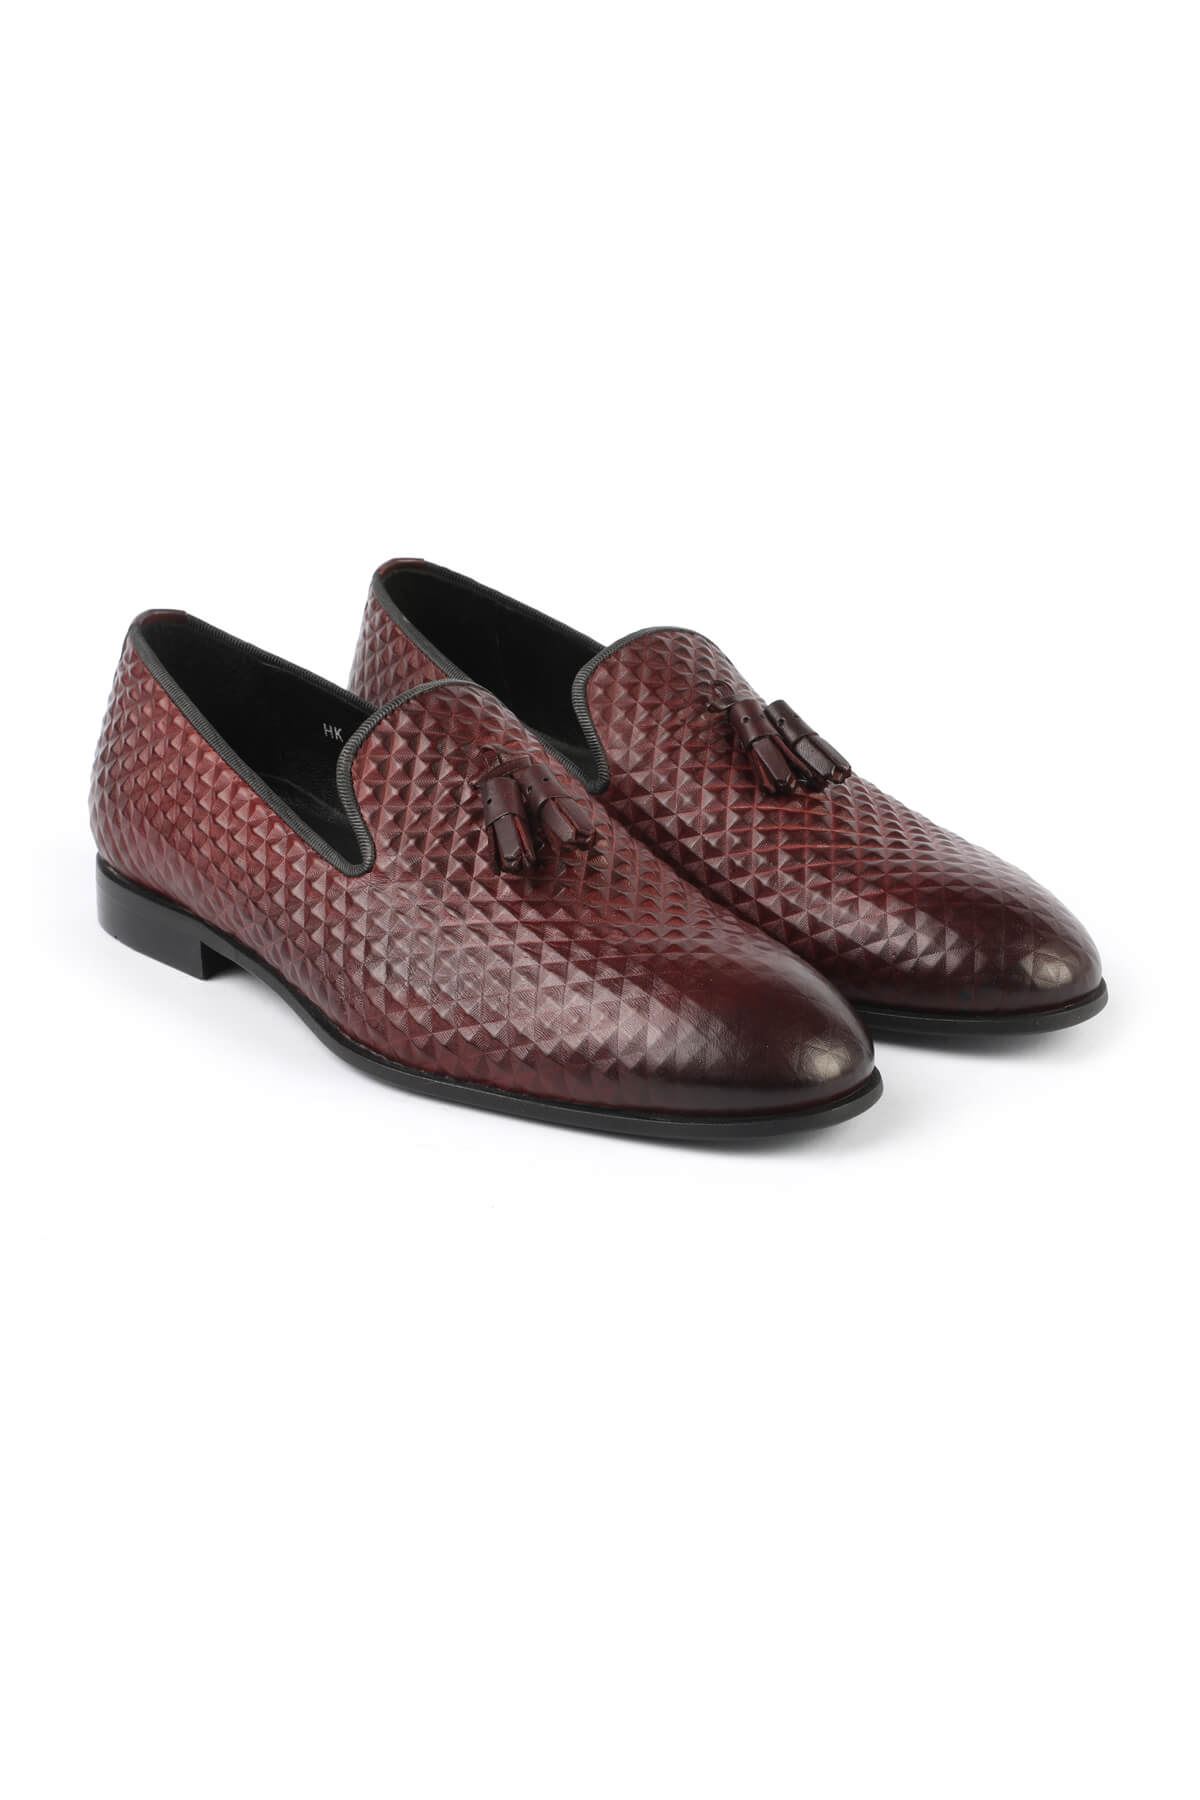 Libero 2830 Claret Red Loafer Shoes